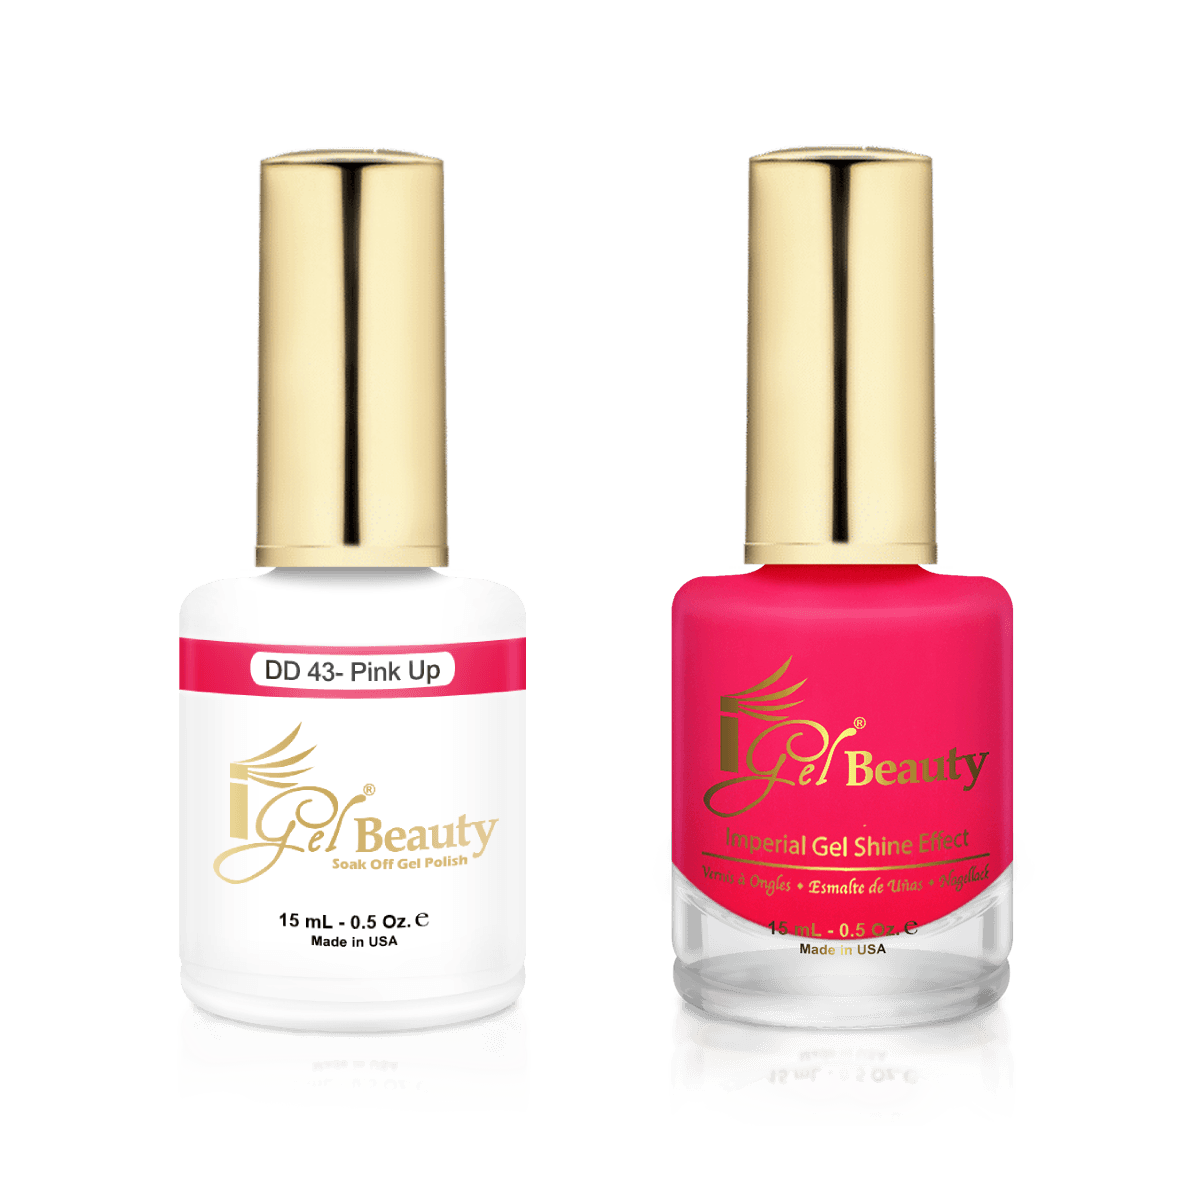 IGel Duo Gel Polish + Matching Nail Lacquer DD 43 PINK UP